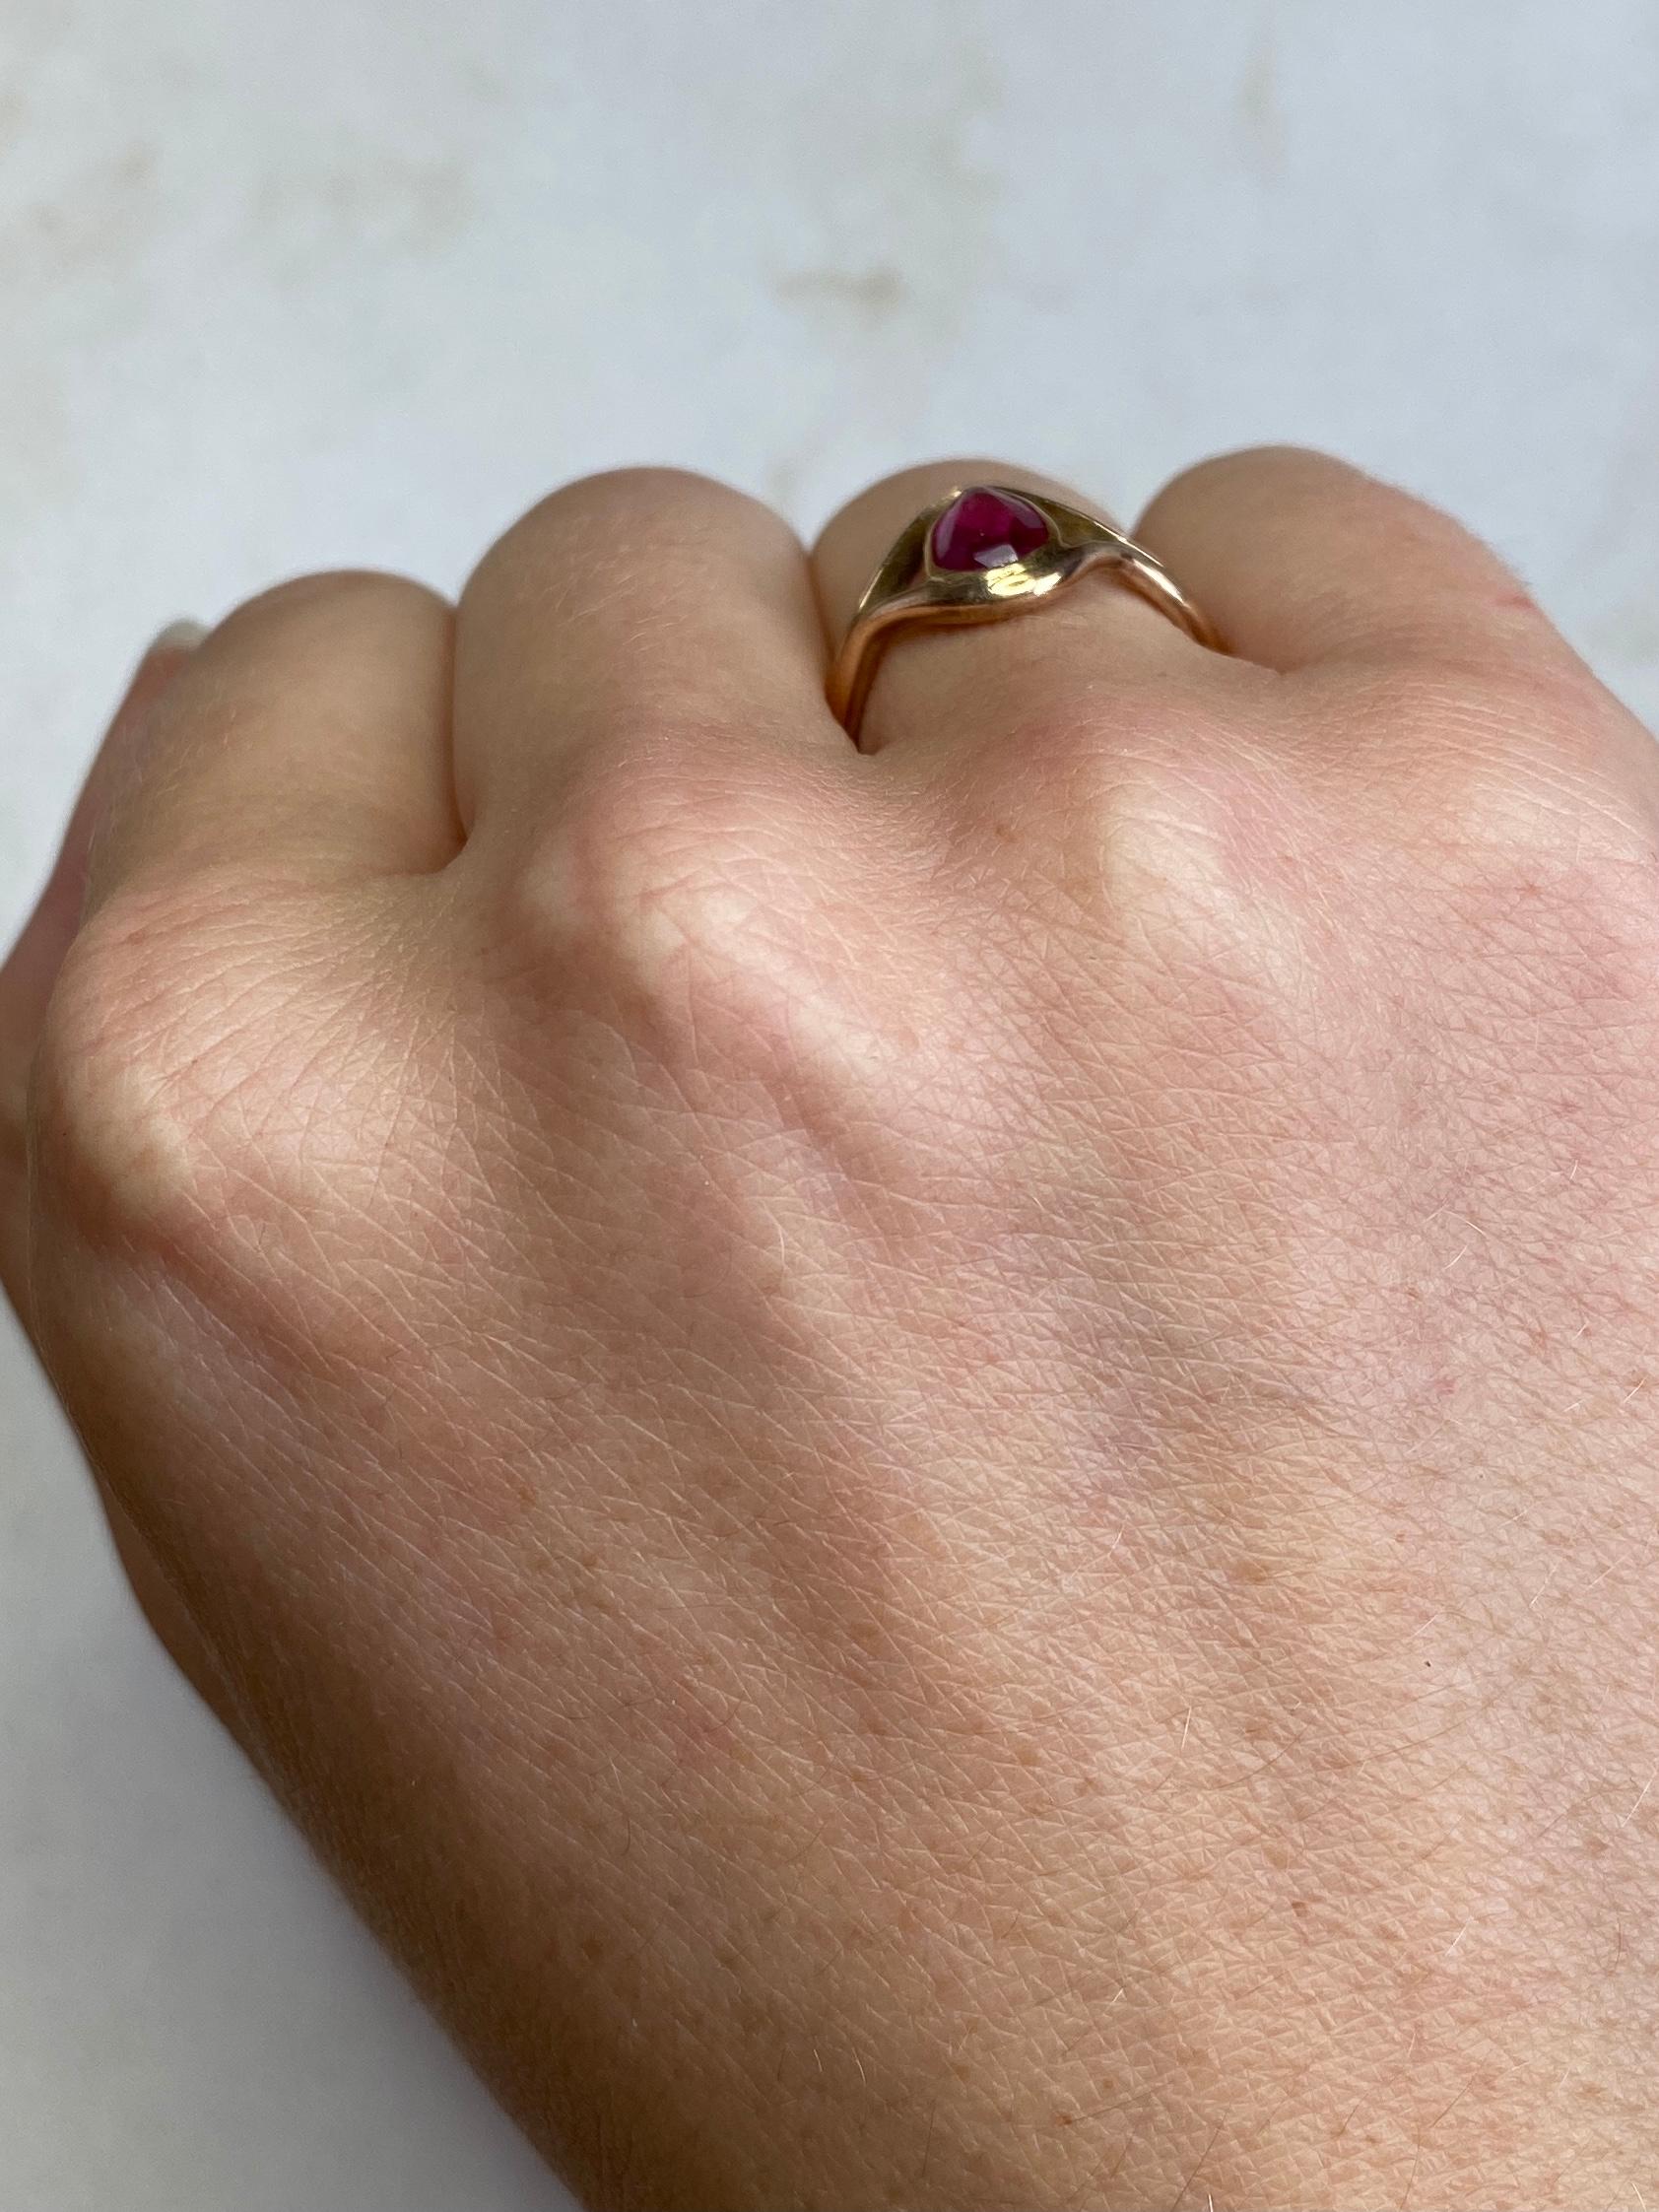 This gorgeous 9carat gold ring holds a glossy 80pt ruby stone set within it. Fully hallmarked London 1942.

Ring Size: K 1/2 or 5 1/2 

Weight: 2.9g